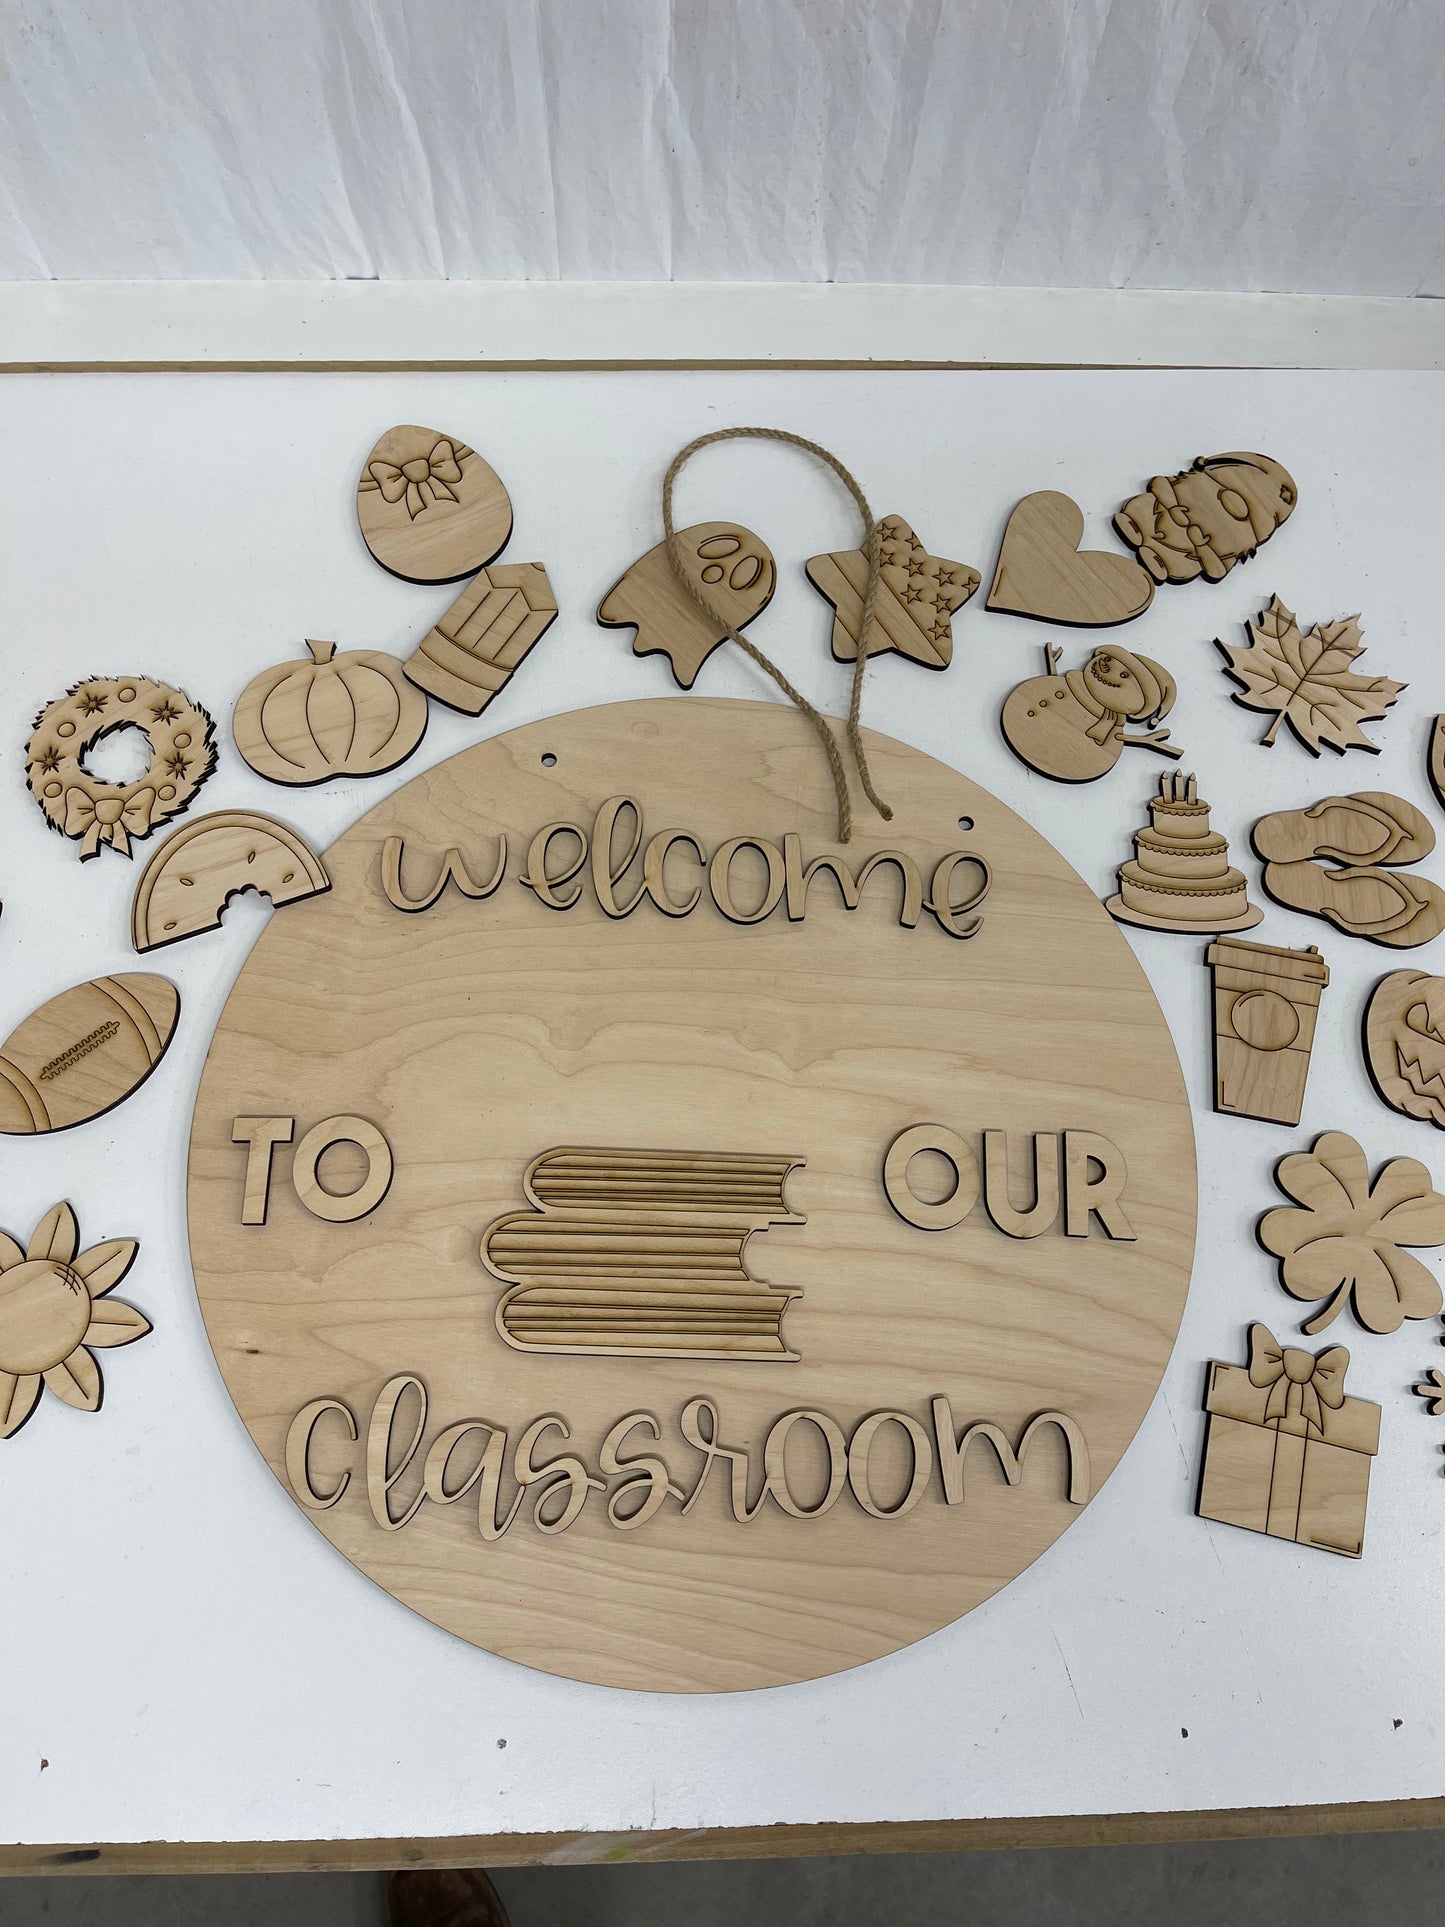 DIY Paint Kit, Welcome to our classroom seasonal change icon circle door hanging wood sign